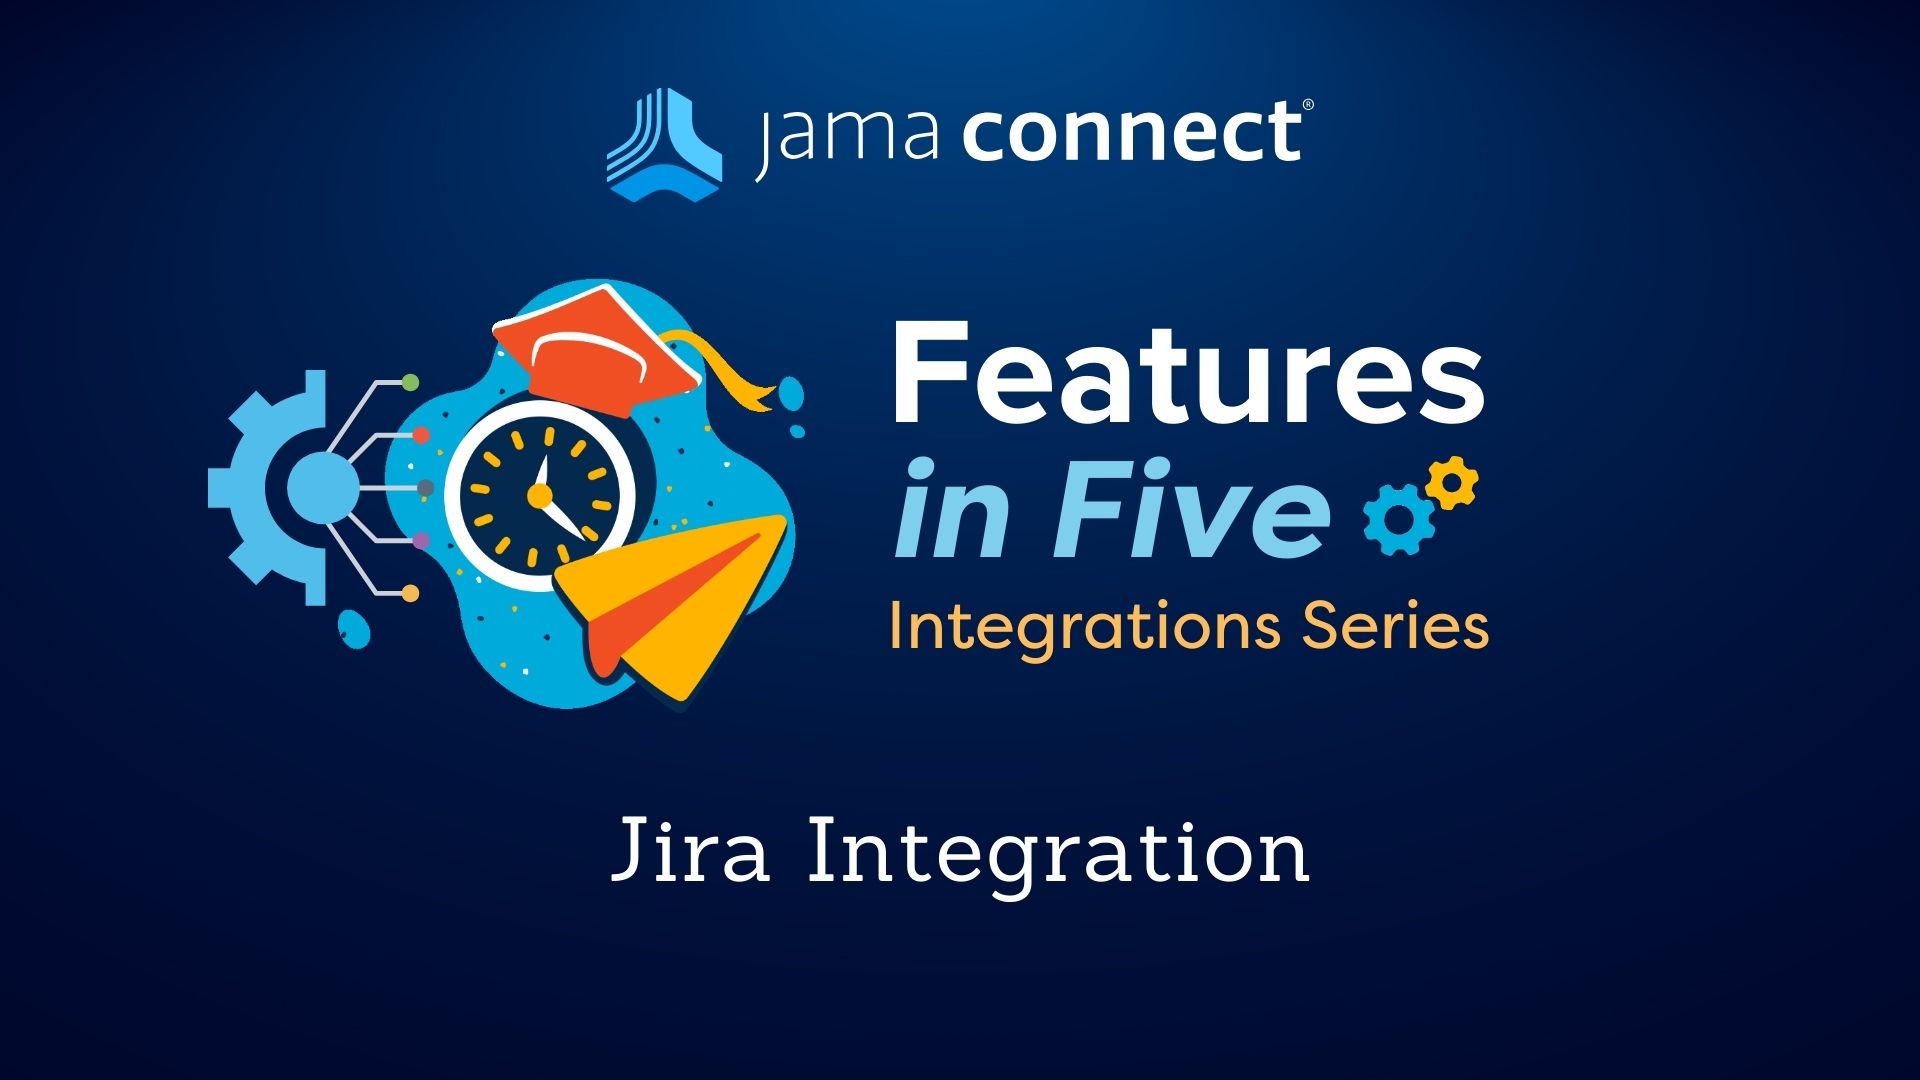 Jama Connect® Features in Five: Jira Integration